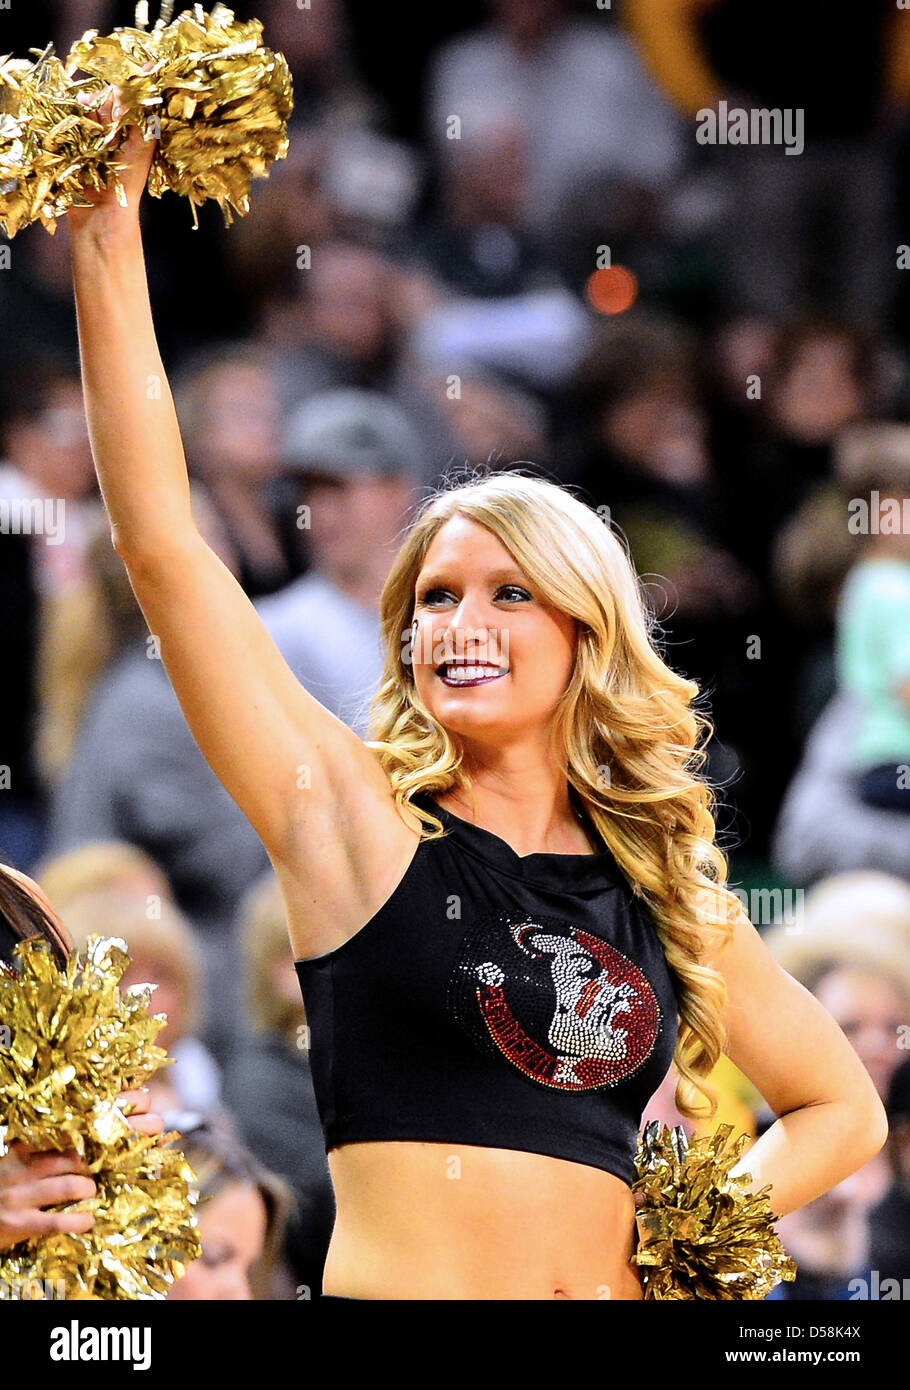 March 26, 2013 - Waco, TX, U.S - March 26, 2013 Florida State cheerleader during second round of NCAA Women's Basketball regional tournament at Ferrell Center in Waco, TX. Stock Photo